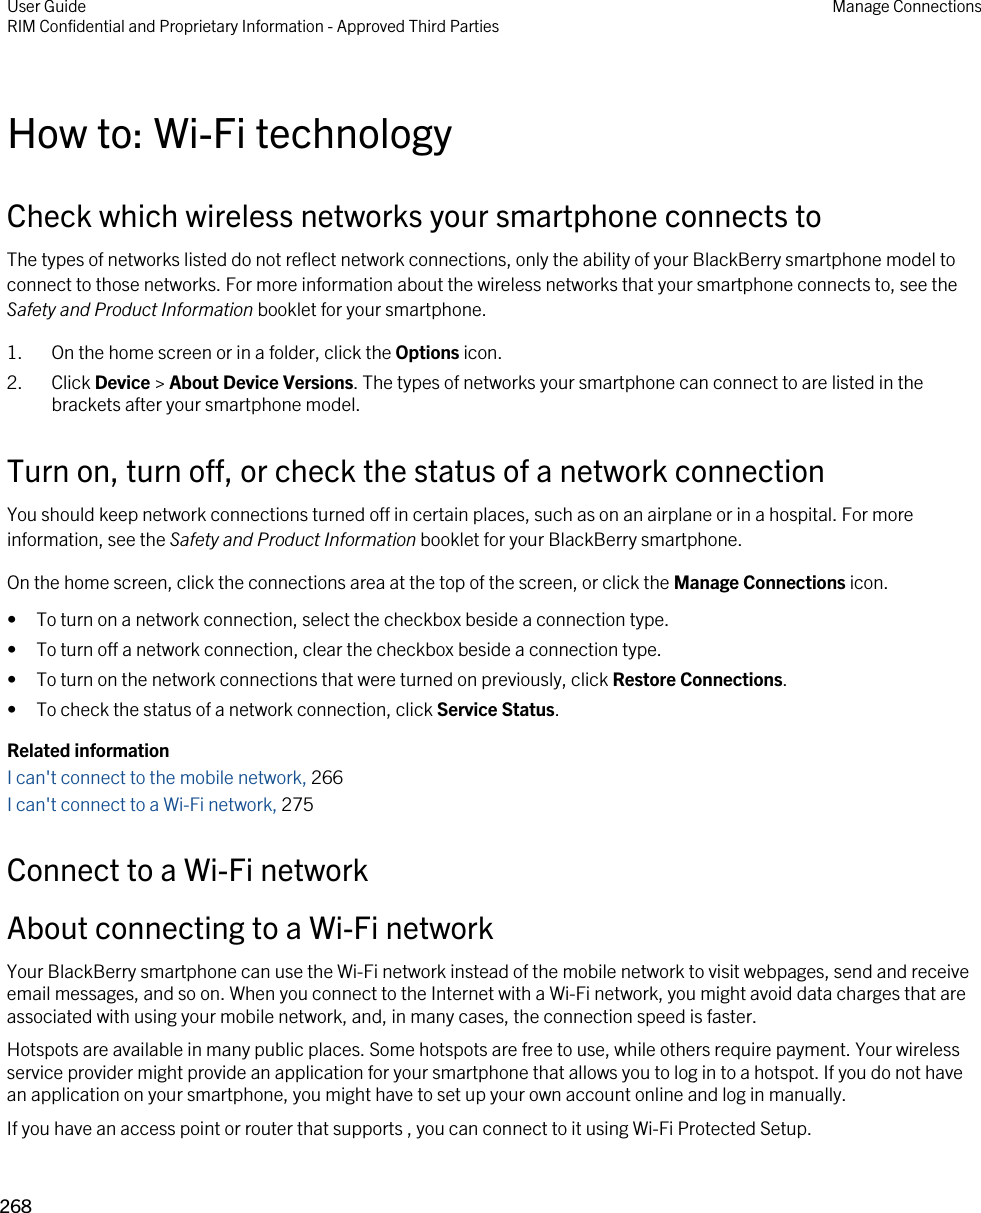 How to: Wi-Fi technologyCheck which wireless networks your smartphone connects toThe types of networks listed do not reflect network connections, only the ability of your BlackBerry smartphone model to connect to those networks. For more information about the wireless networks that your smartphone connects to, see the Safety and Product Information booklet for your smartphone.1. On the home screen or in a folder, click the Options icon.2. Click Device &gt; About Device Versions. The types of networks your smartphone can connect to are listed in the brackets after your smartphone model.Turn on, turn off, or check the status of a network connectionYou should keep network connections turned off in certain places, such as on an airplane or in a hospital. For more information, see the Safety and Product Information booklet for your BlackBerry smartphone.On the home screen, click the connections area at the top of the screen, or click the Manage Connections icon.• To turn on a network connection, select the checkbox beside a connection type.• To turn off a network connection, clear the checkbox beside a connection type.• To turn on the network connections that were turned on previously, click Restore Connections.• To check the status of a network connection, click Service Status.Related informationI can&apos;t connect to the mobile network, 266 I can&apos;t connect to a Wi-Fi network, 275Connect to a Wi-Fi networkAbout connecting to a Wi-Fi networkYour BlackBerry smartphone can use the Wi-Fi network instead of the mobile network to visit webpages, send and receive email messages, and so on. When you connect to the Internet with a Wi-Fi network, you might avoid data charges that are associated with using your mobile network, and, in many cases, the connection speed is faster.Hotspots are available in many public places. Some hotspots are free to use, while others require payment. Your wireless service provider might provide an application for your smartphone that allows you to log in to a hotspot. If you do not have an application on your smartphone, you might have to set up your own account online and log in manually.If you have an access point or router that supports , you can connect to it using Wi-Fi Protected Setup.User GuideRIM Confidential and Proprietary Information - Approved Third Parties Manage Connections268 